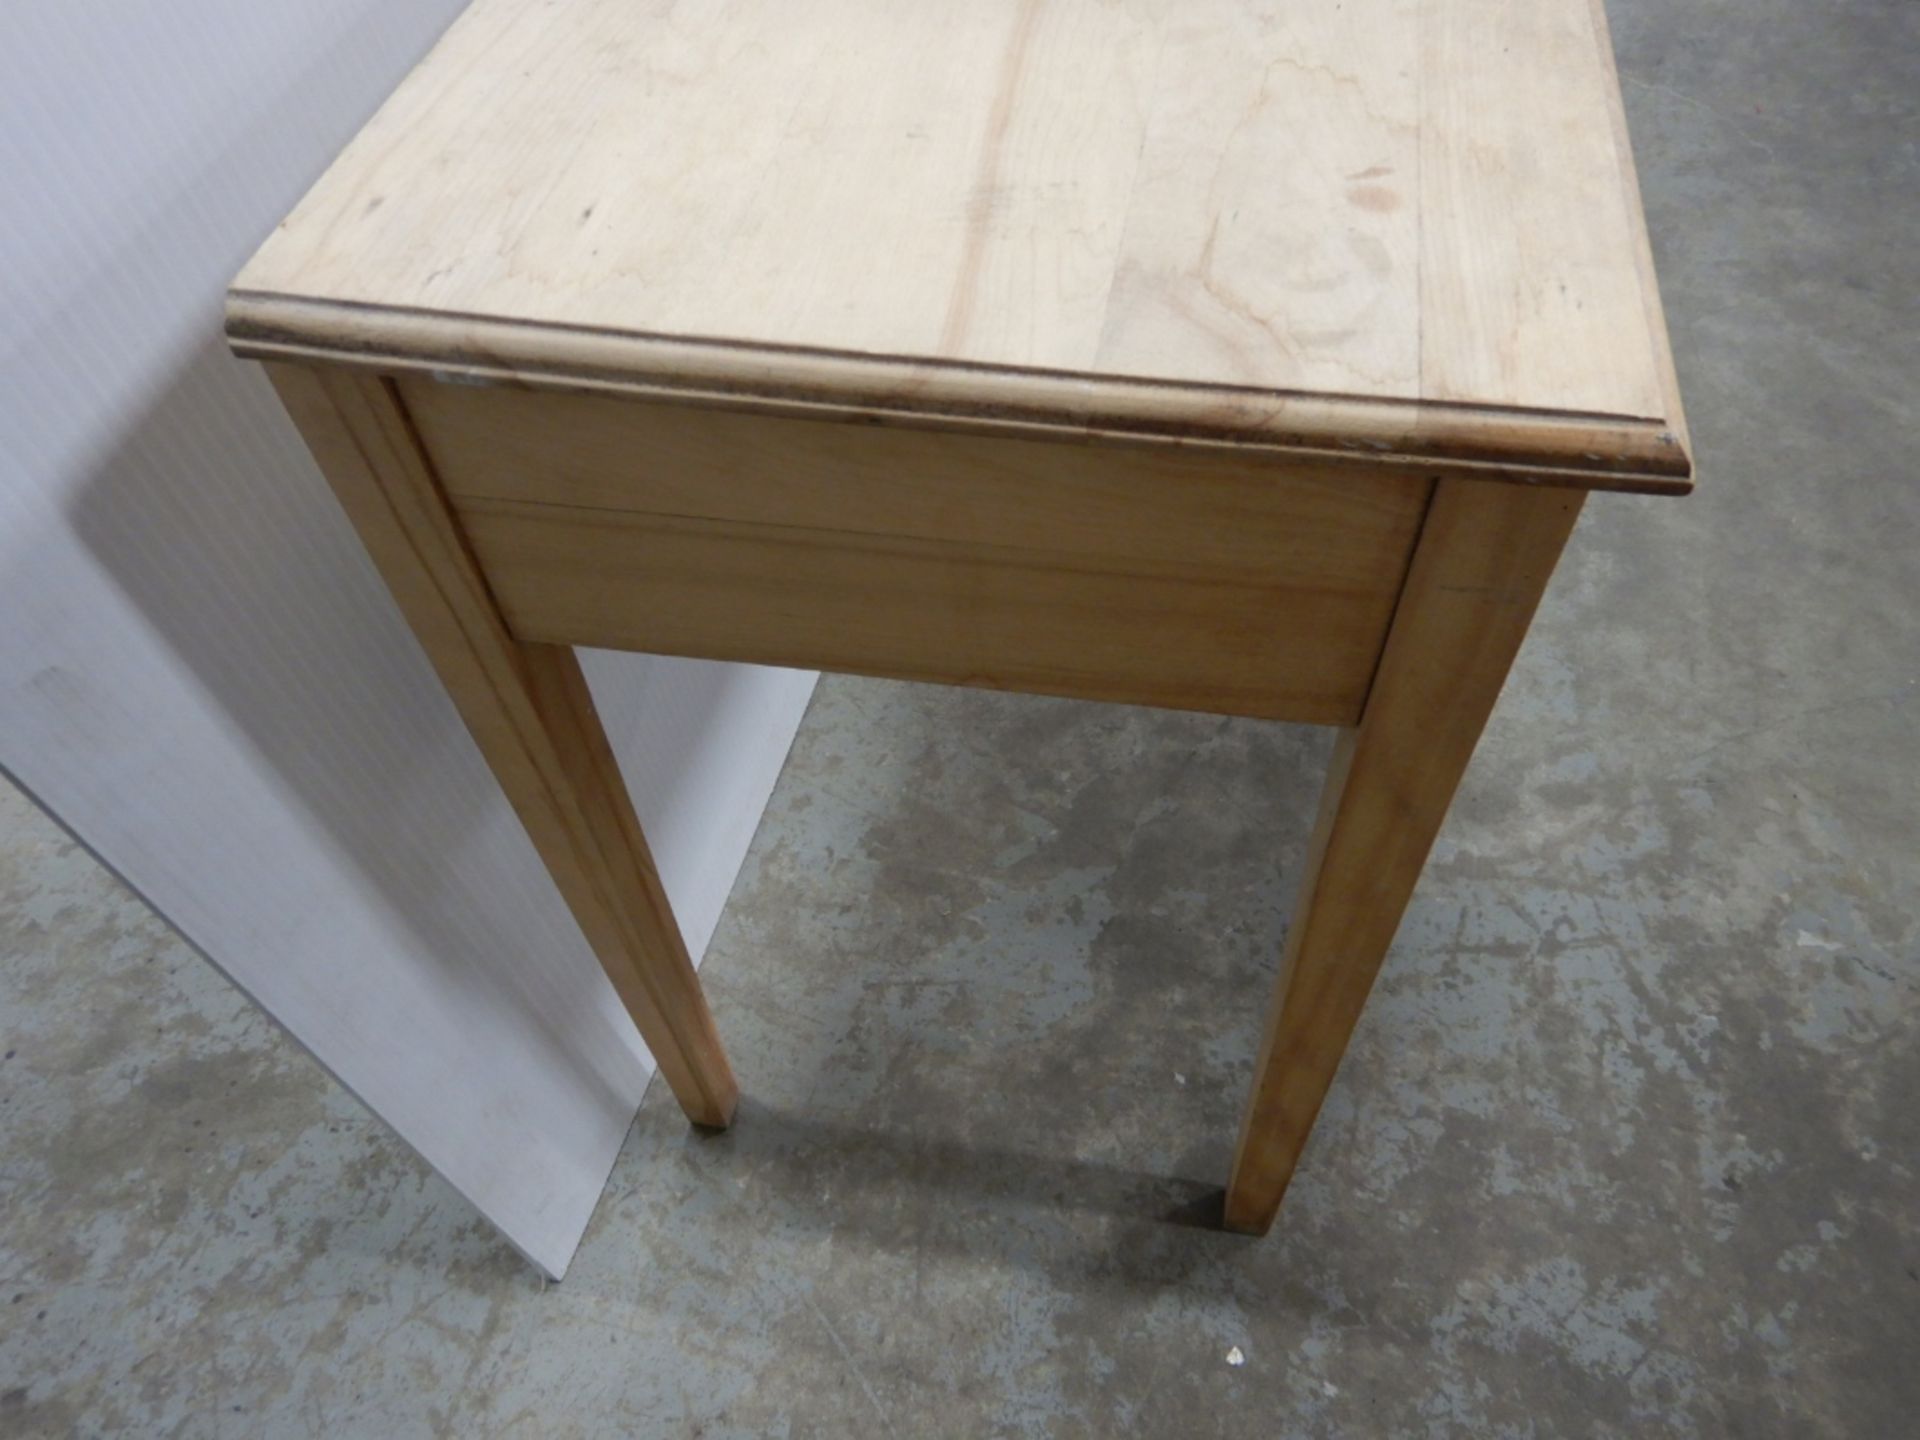 18" X 36" MILLWORK TWO DRAWER TABLE - Image 5 of 6